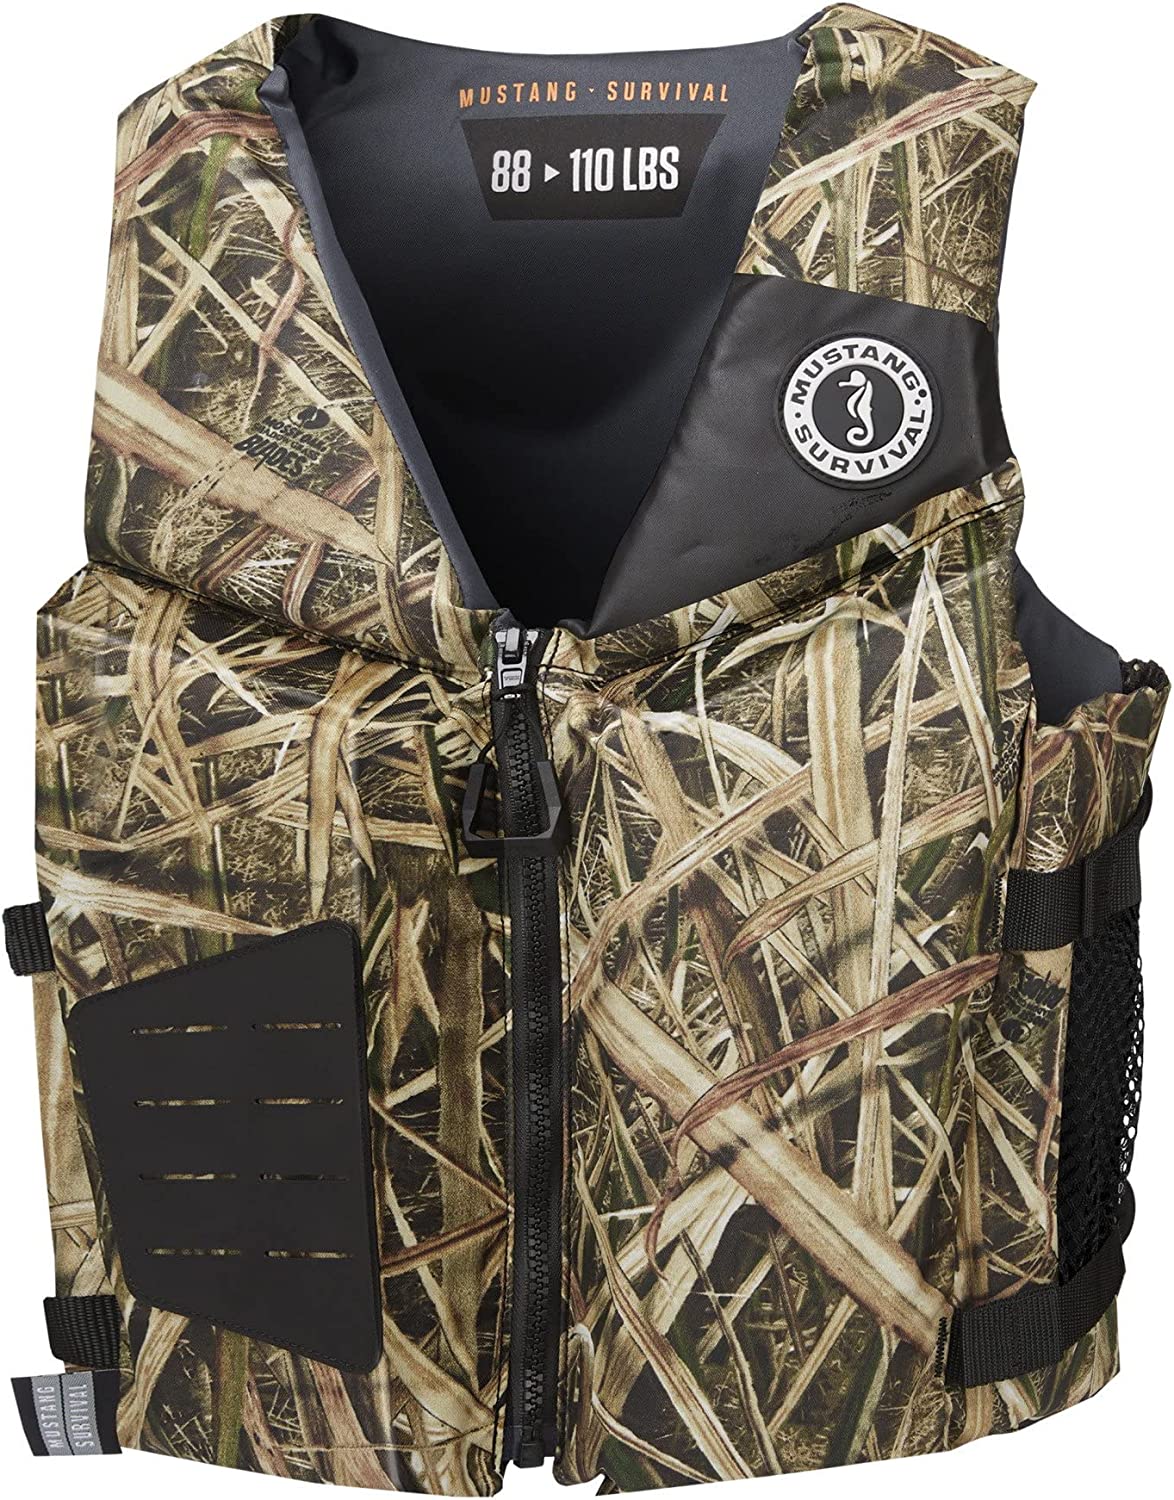 Mustang Survival – Rev Young Adult Foam Vest – Mossy Oak Shadow Grass Blades, Young Adult (88 lbs – 110 lbs)